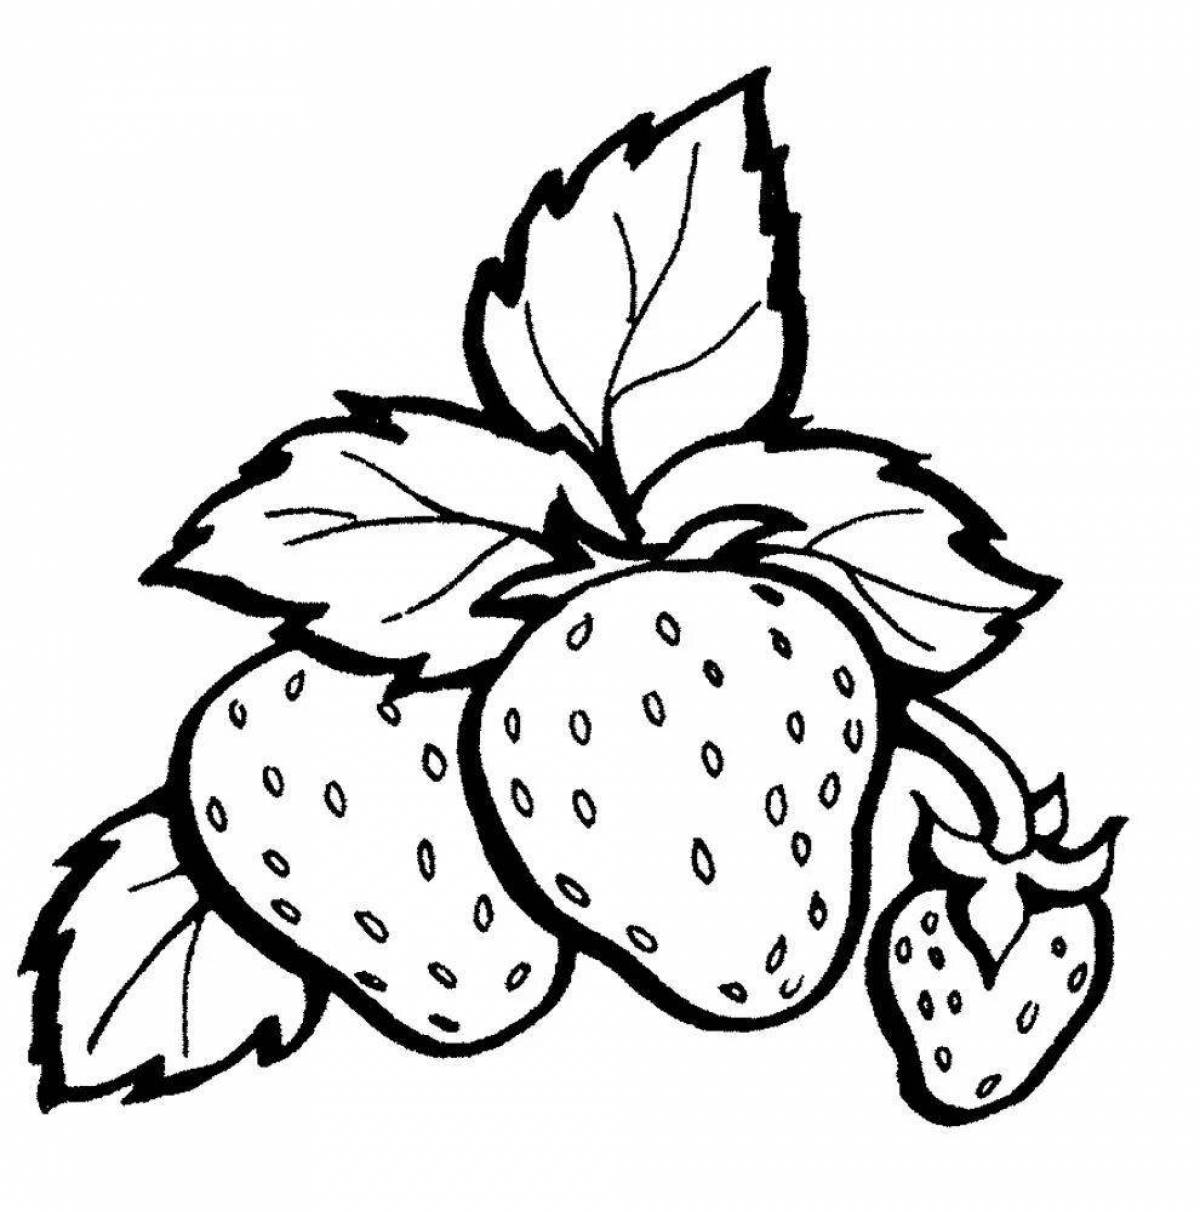 Delightful strawberry coloring book for kids